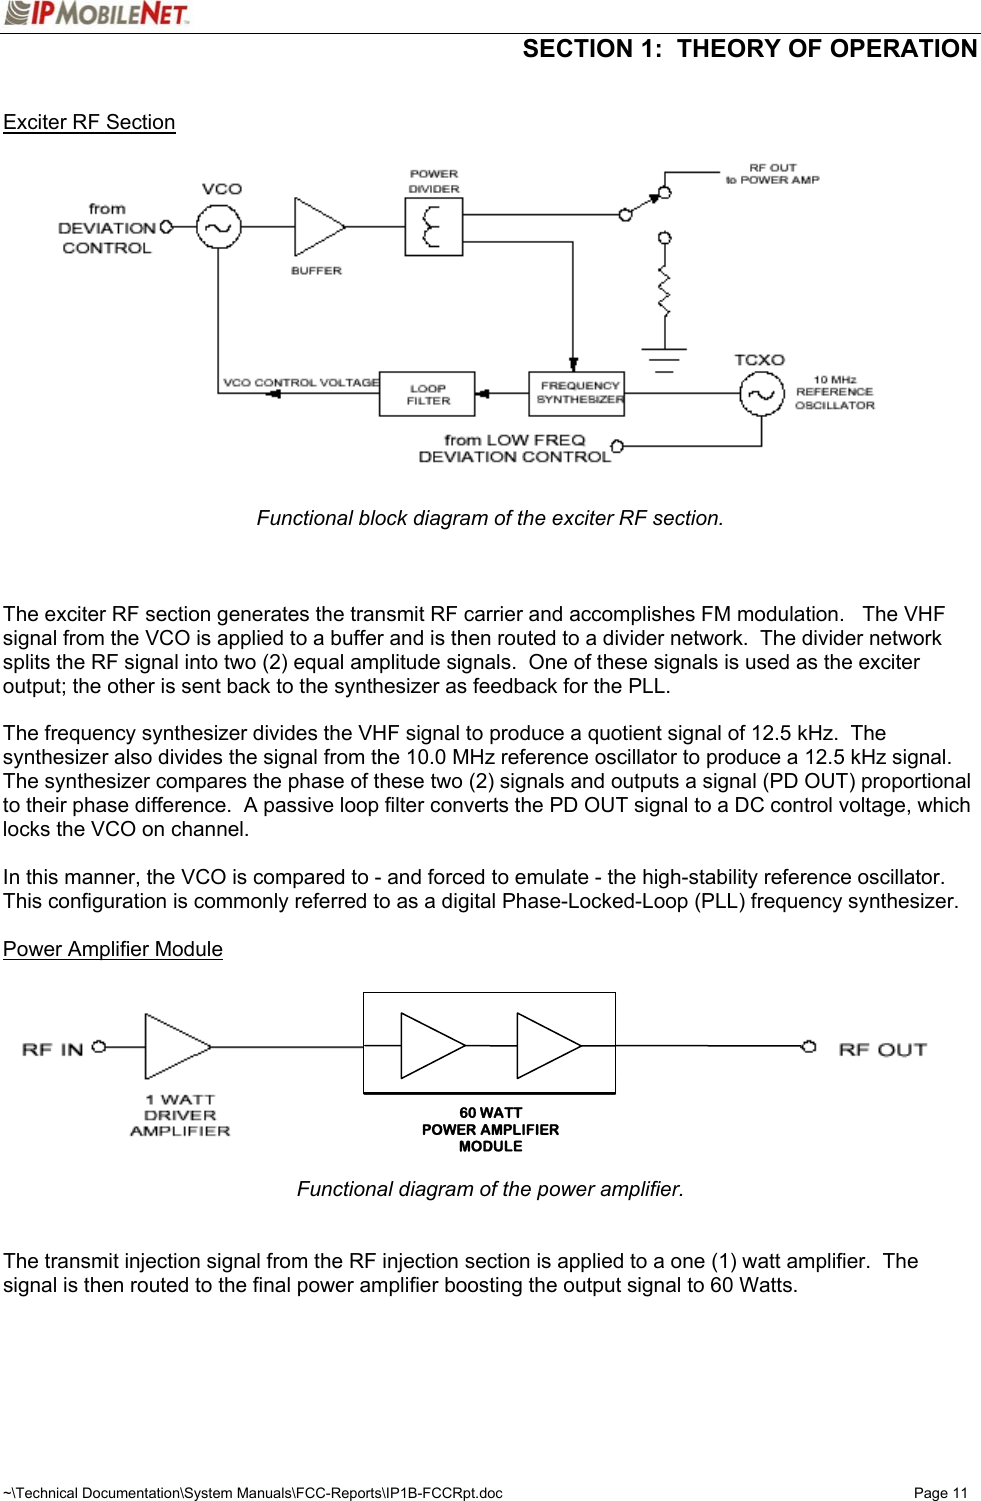  SECTION 1:  THEORY OF OPERATION  ~\Technical Documentation\System Manuals\FCC-Reports\IP1B-FCCRpt.doc  Page 11  Exciter RF Section  Functional block diagram of the exciter RF section.    The exciter RF section generates the transmit RF carrier and accomplishes FM modulation.   The VHF signal from the VCO is applied to a buffer and is then routed to a divider network.  The divider network splits the RF signal into two (2) equal amplitude signals.  One of these signals is used as the exciter output; the other is sent back to the synthesizer as feedback for the PLL.  The frequency synthesizer divides the VHF signal to produce a quotient signal of 12.5 kHz.  The synthesizer also divides the signal from the 10.0 MHz reference oscillator to produce a 12.5 kHz signal.  The synthesizer compares the phase of these two (2) signals and outputs a signal (PD OUT) proportional to their phase difference.  A passive loop filter converts the PD OUT signal to a DC control voltage, which locks the VCO on channel.  In this manner, the VCO is compared to - and forced to emulate - the high-stability reference oscillator.  This configuration is commonly referred to as a digital Phase-Locked-Loop (PLL) frequency synthesizer.  Power Amplifier Module Functional diagram of the power amplifier.   The transmit injection signal from the RF injection section is applied to a one (1) watt amplifier.  The signal is then routed to the final power amplifier boosting the output signal to 60 Watts.    60 WATTPOWER AMPLIFIERMODULE